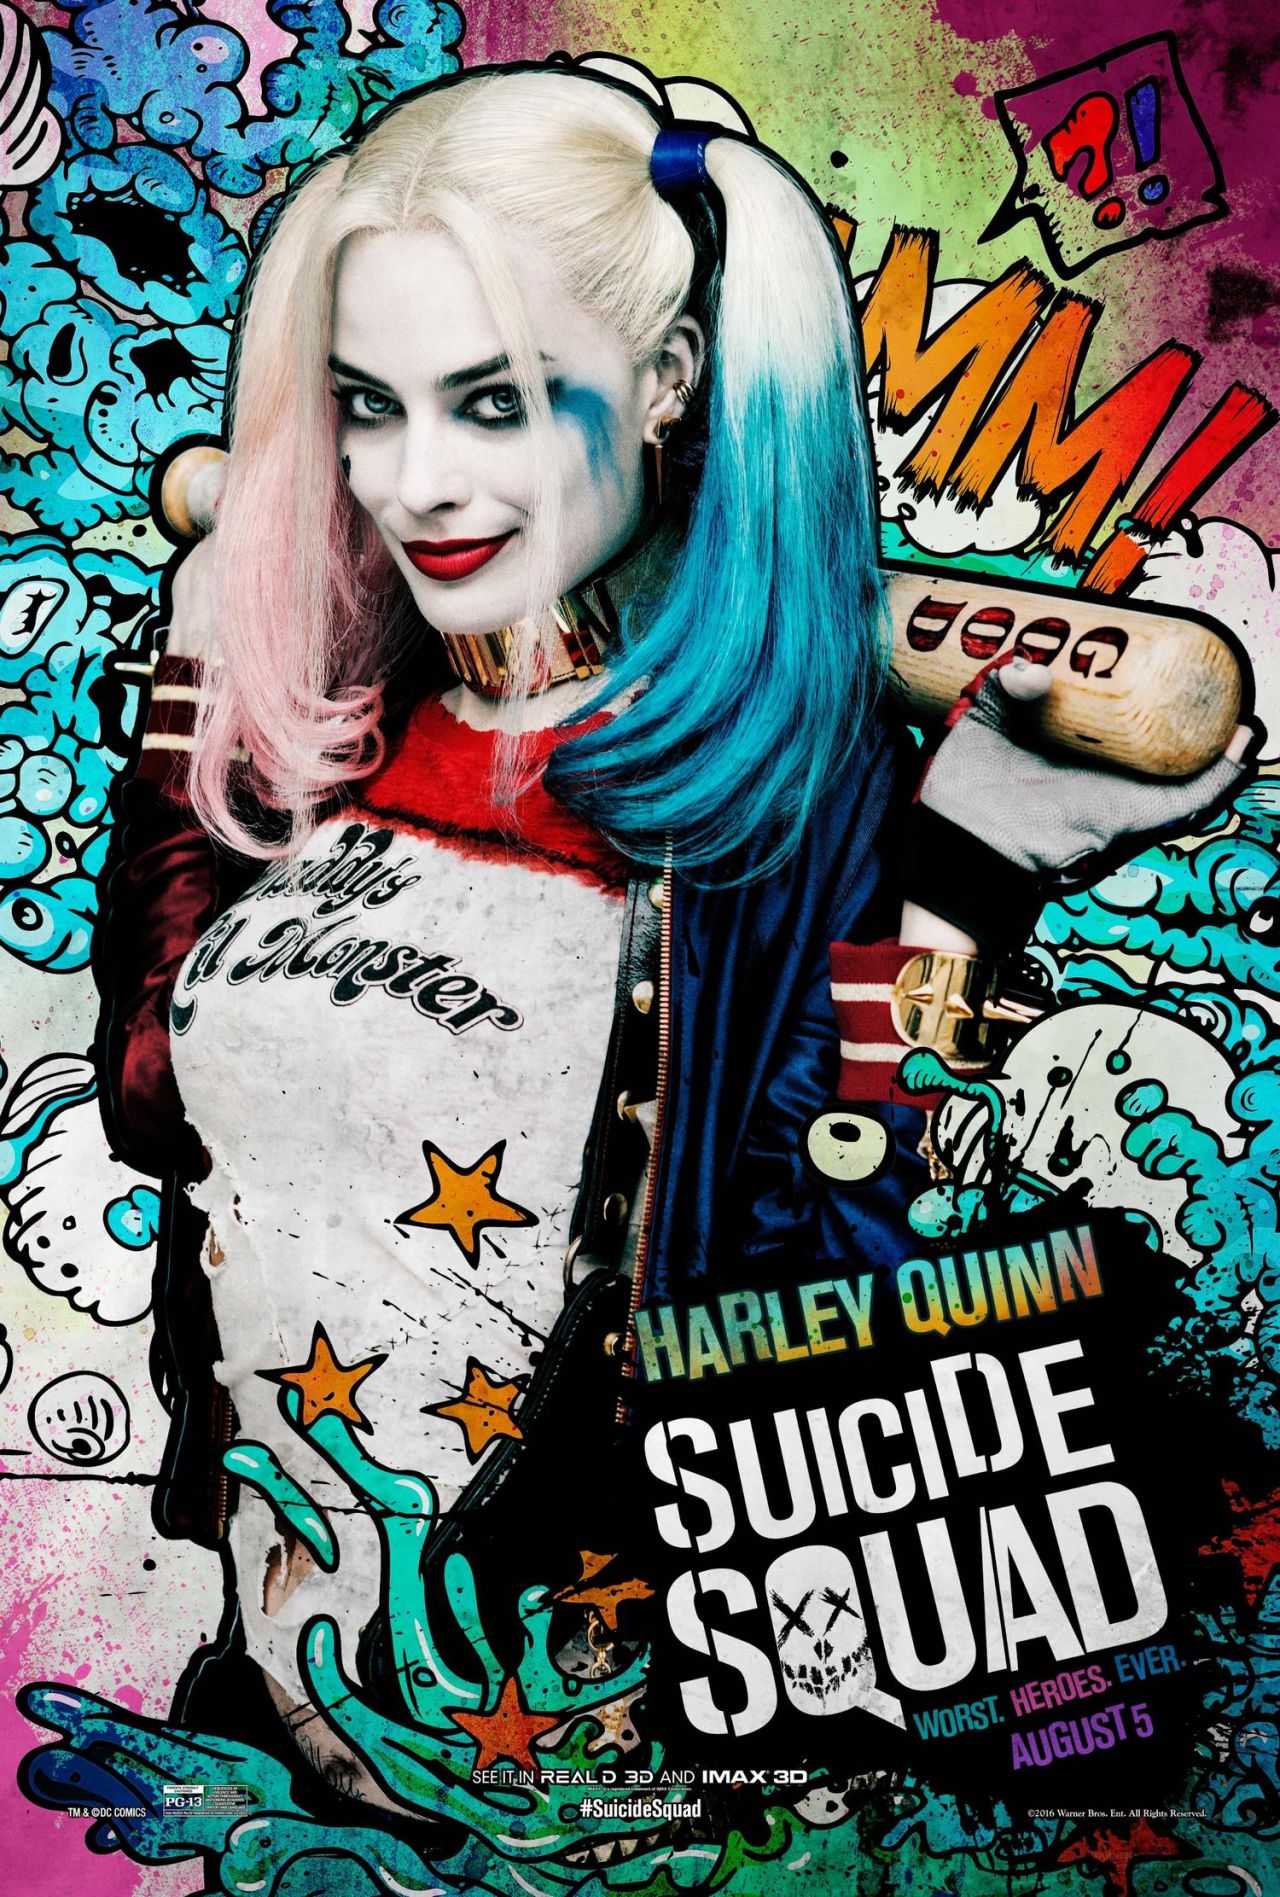 Margot Robbie - Suicide Squad Promo Photos, Posters and Stills1280 x 1897